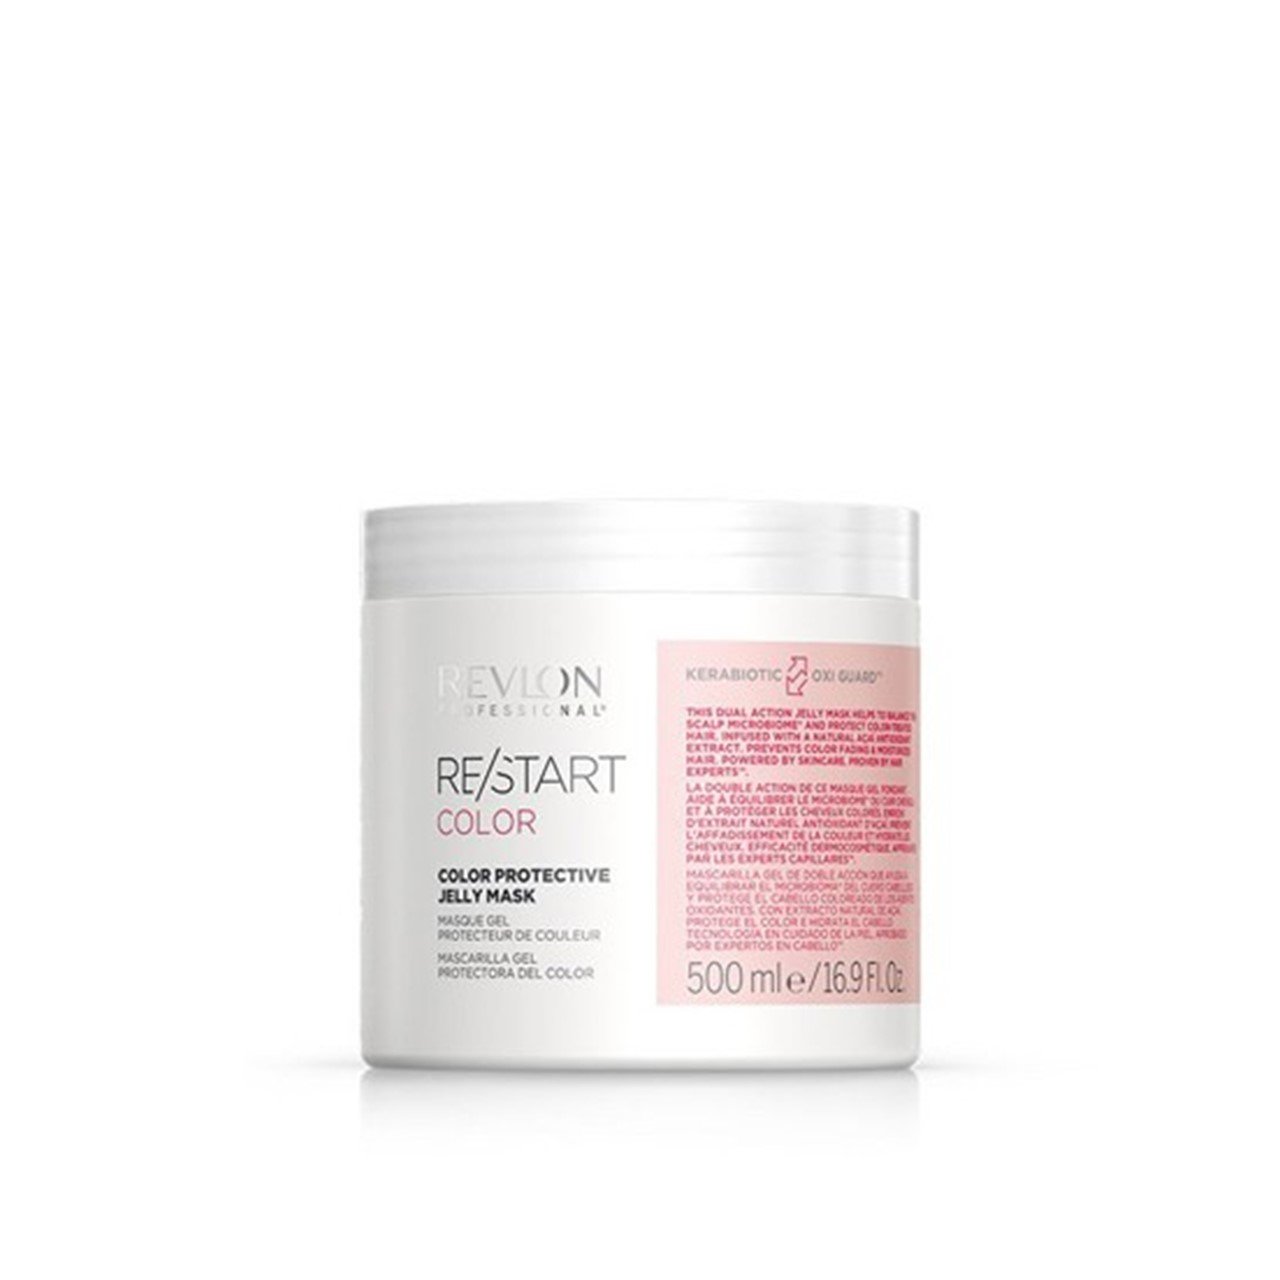 Re/Start Protective Revlon Mask Jelly Buy 500ml Color · USA Professional